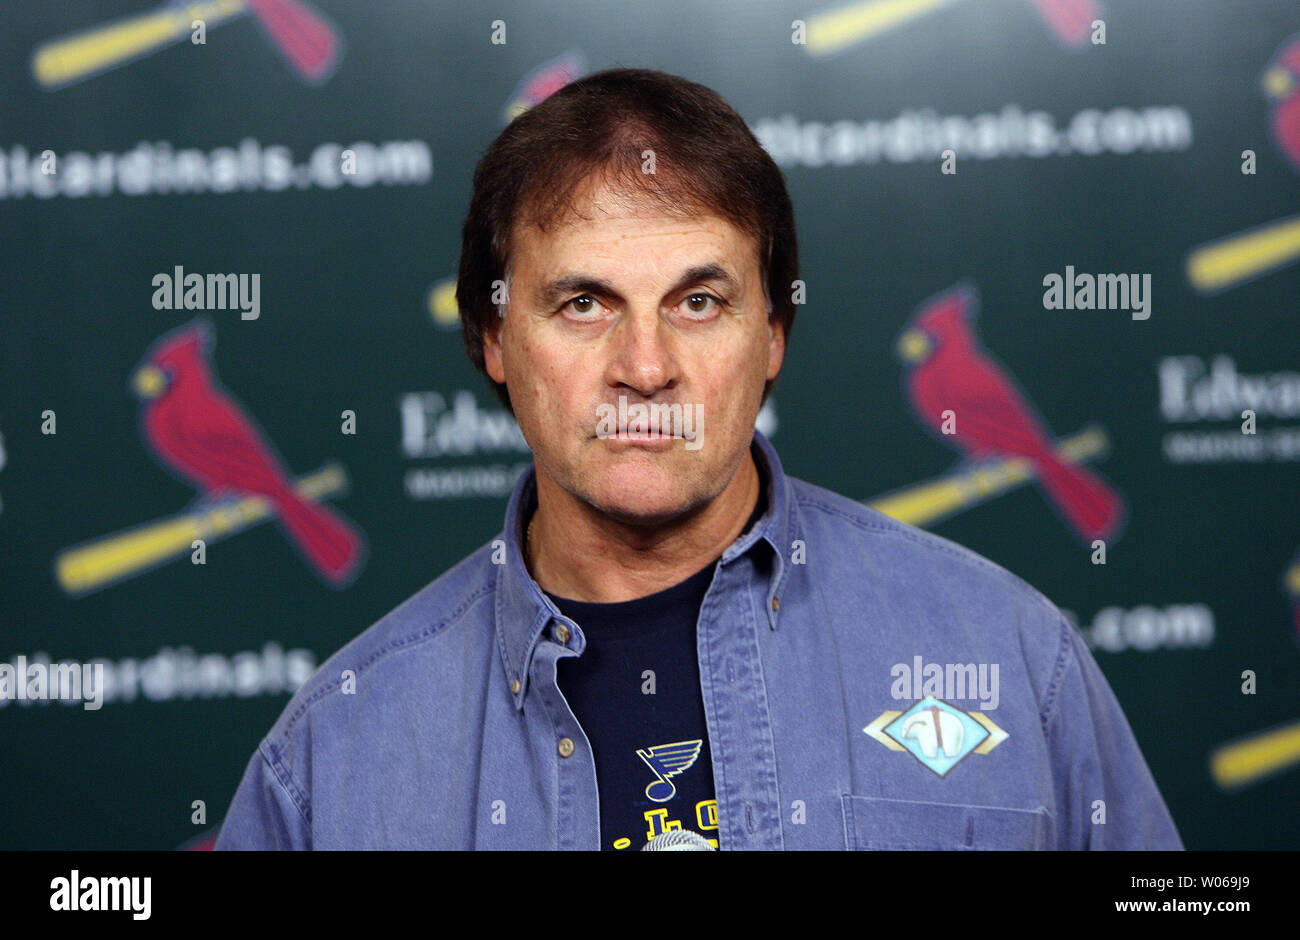 St. Louis Cardinals manager Tony La Russa addresses reporters about new players the team has signed, contract negotations with current players and his plans for the upcoming 2007 season, at Busch Stadium in St. Louis on December 13, 2006. (UPI Photo/Bill Greenblatt) Stock Photo